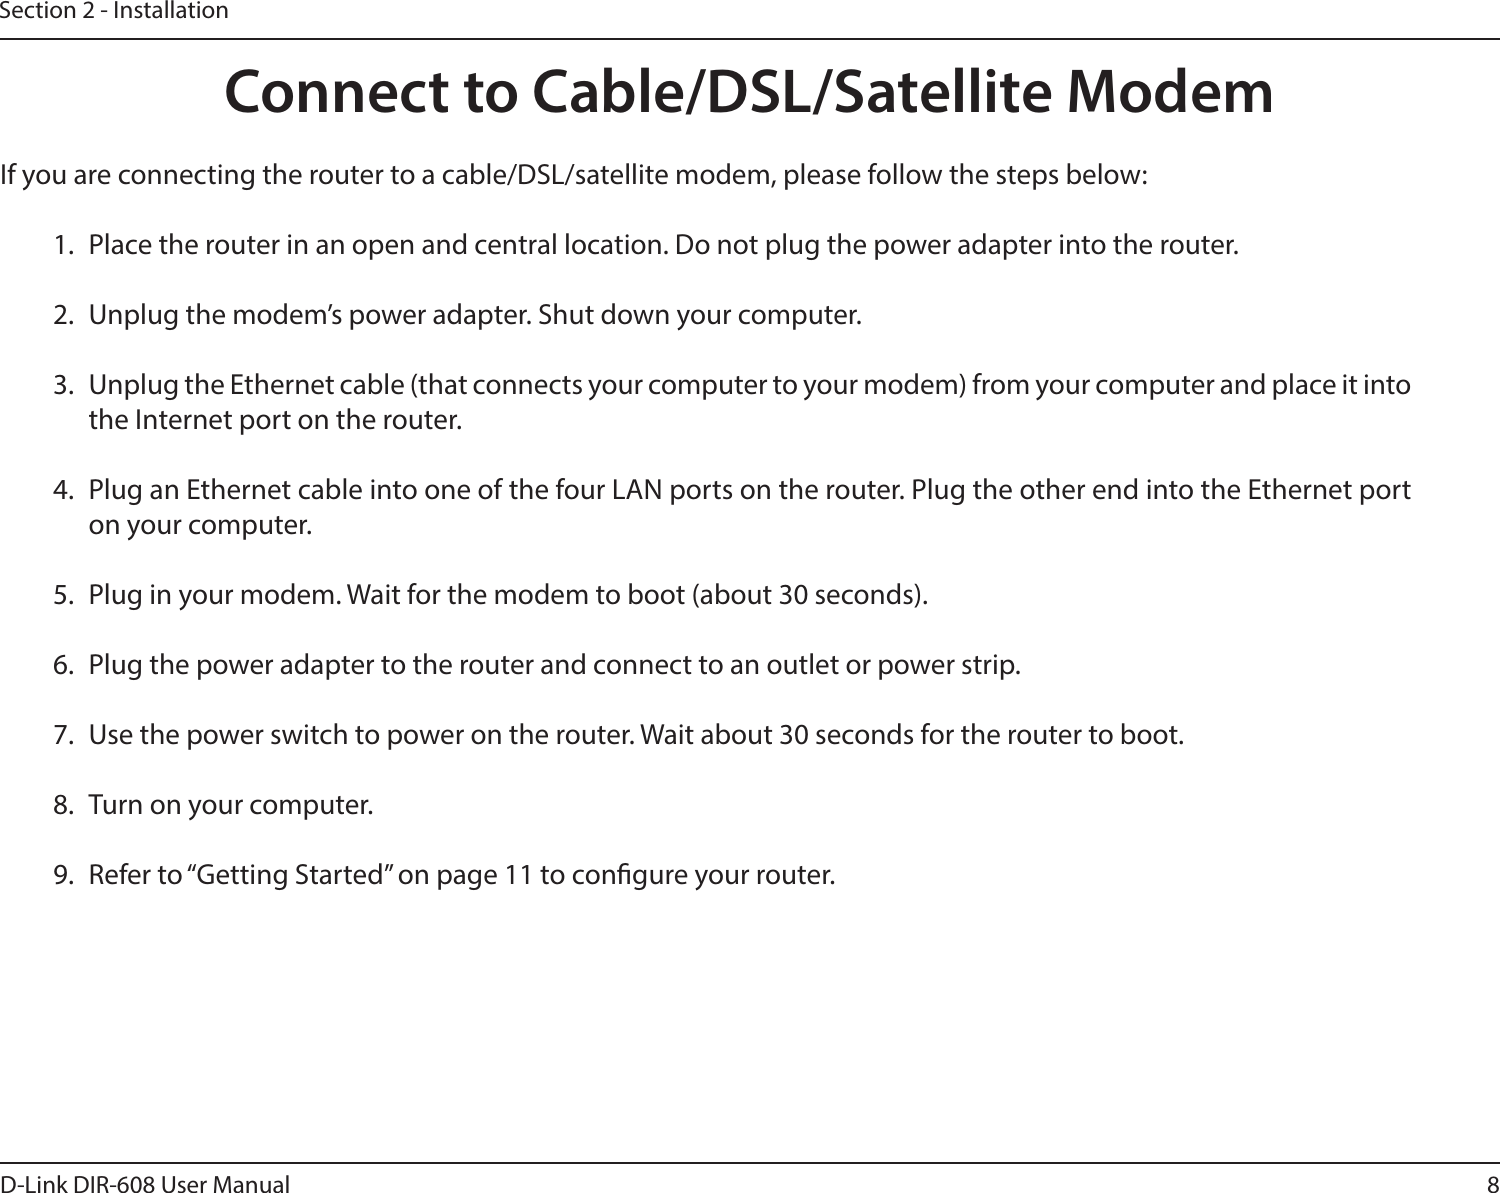 8D-Link DIR-608 User ManualSection 2 - InstallationIf you are connecting the router to a cable/DSL/satellite modem, please follow the steps below:1.  Place the router in an open and central location. Do not plug the power adapter into the router.2.  Unplug the modem’s power adapter. Shut down your computer.3.  Unplug the Ethernet cable (that connects your computer to your modem) from your computer and place it into the Internet port on the router.4.  Plug an Ethernet cable into one of the four LAN ports on the router. Plug the other end into the Ethernet port on your computer.5.  Plug in your modem. Wait for the modem to boot (about 30 seconds).6.  Plug the power adapter to the router and connect to an outlet or power strip. 7.  Use the power switch to power on the router. Wait about 30 seconds for the router to boot.8.  Turn on your computer.9.  Refer to “Getting Started” on page 11 to congure your router.Connect to Cable/DSL/Satellite Modem